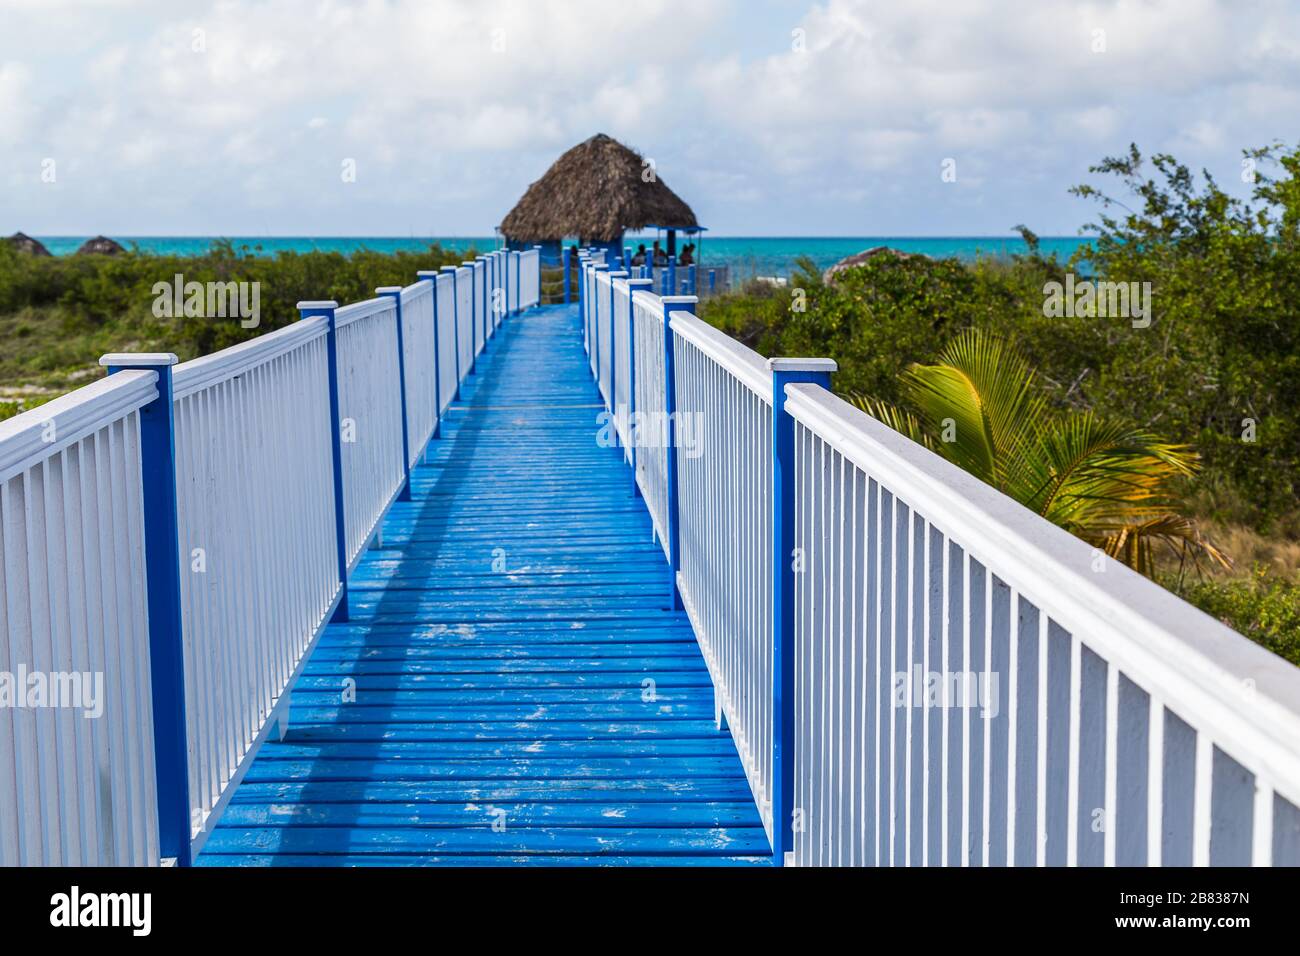 Looking down an elevated wooden walkway to Playa Pilar, one of the most beautiful beaches in Cuba. Stock Photo